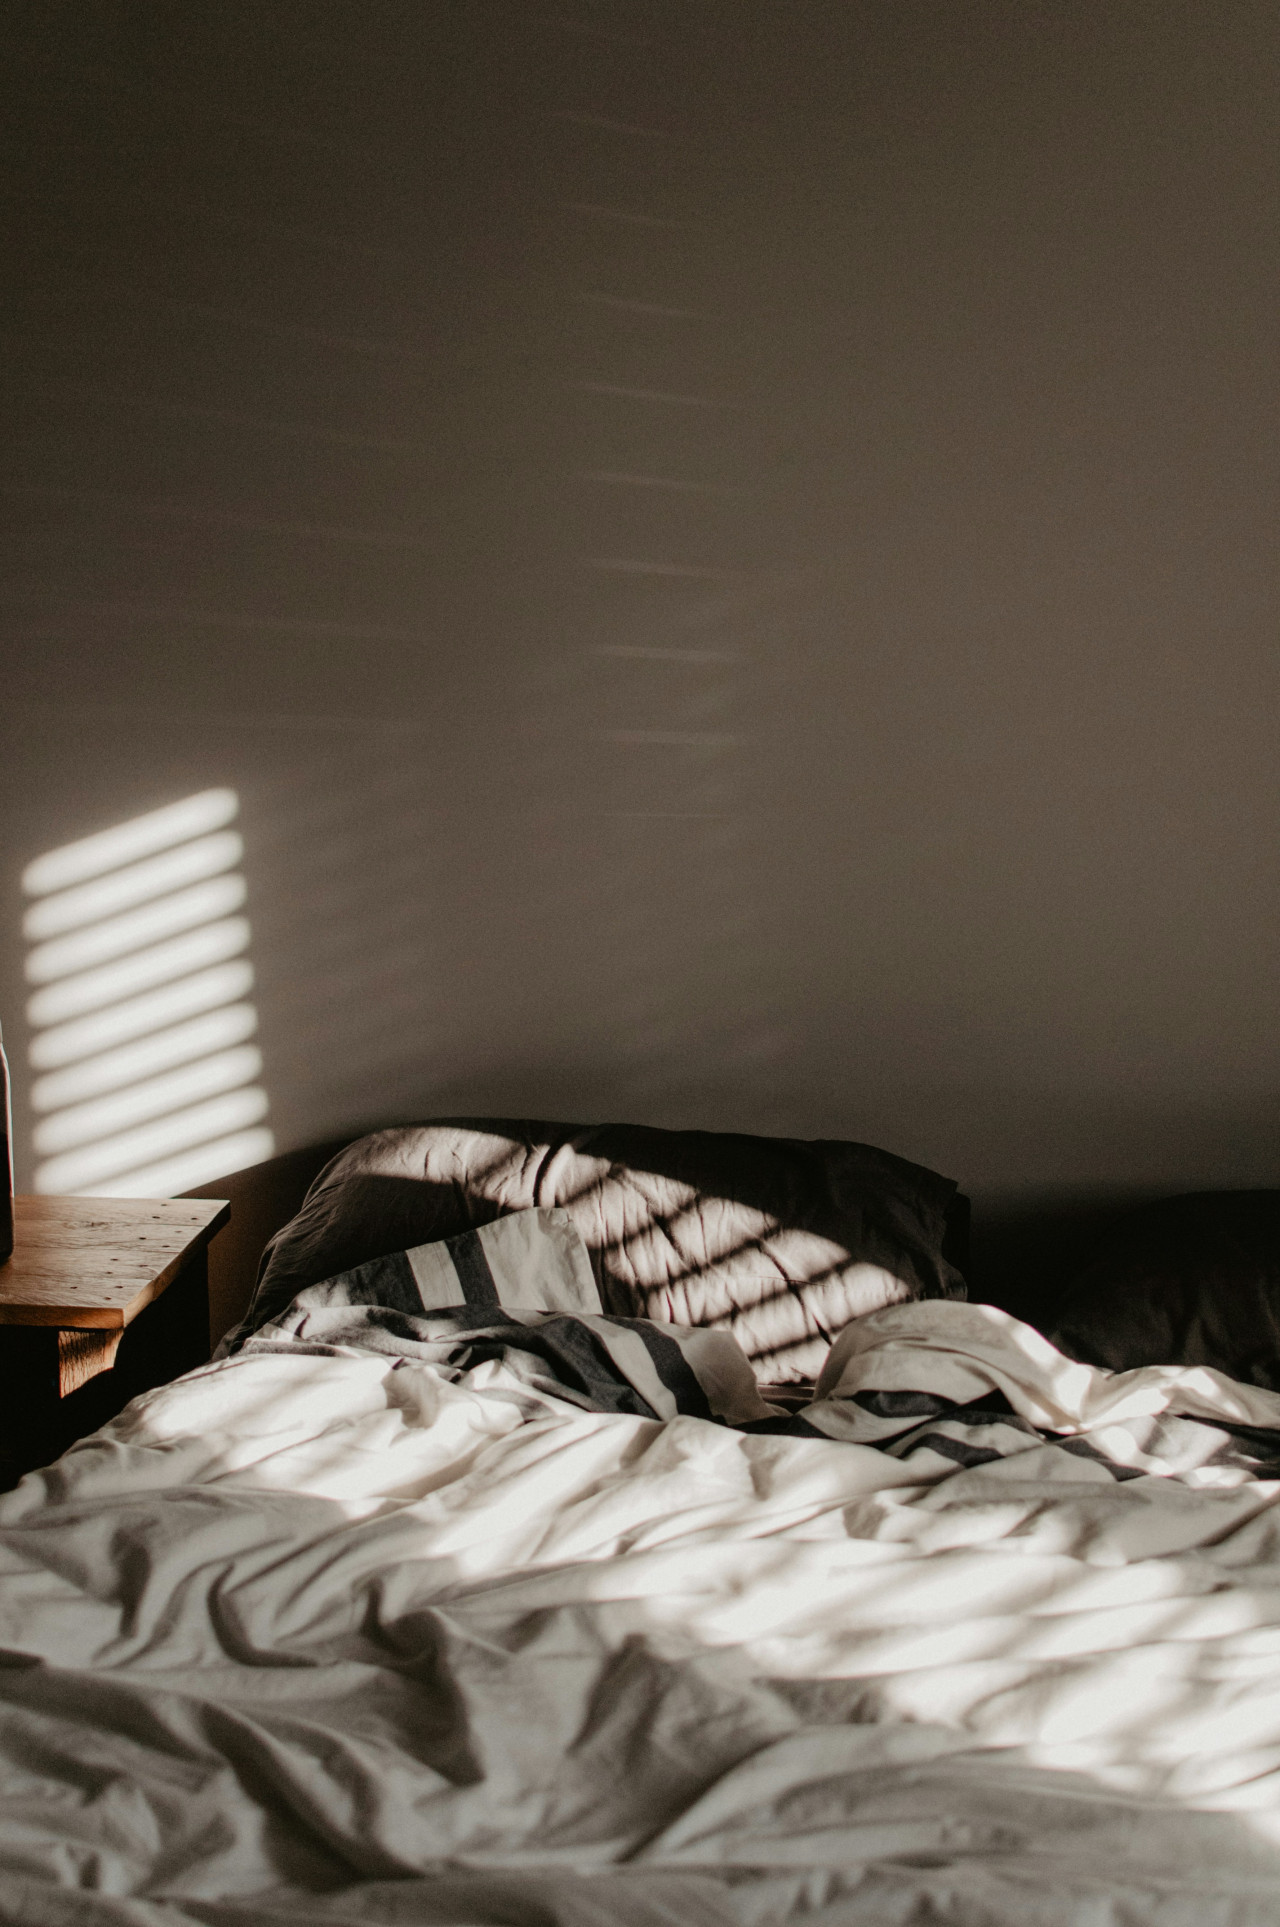 Make the bed, order, cleanliness, morning, wake up.  Unsplash pictures.